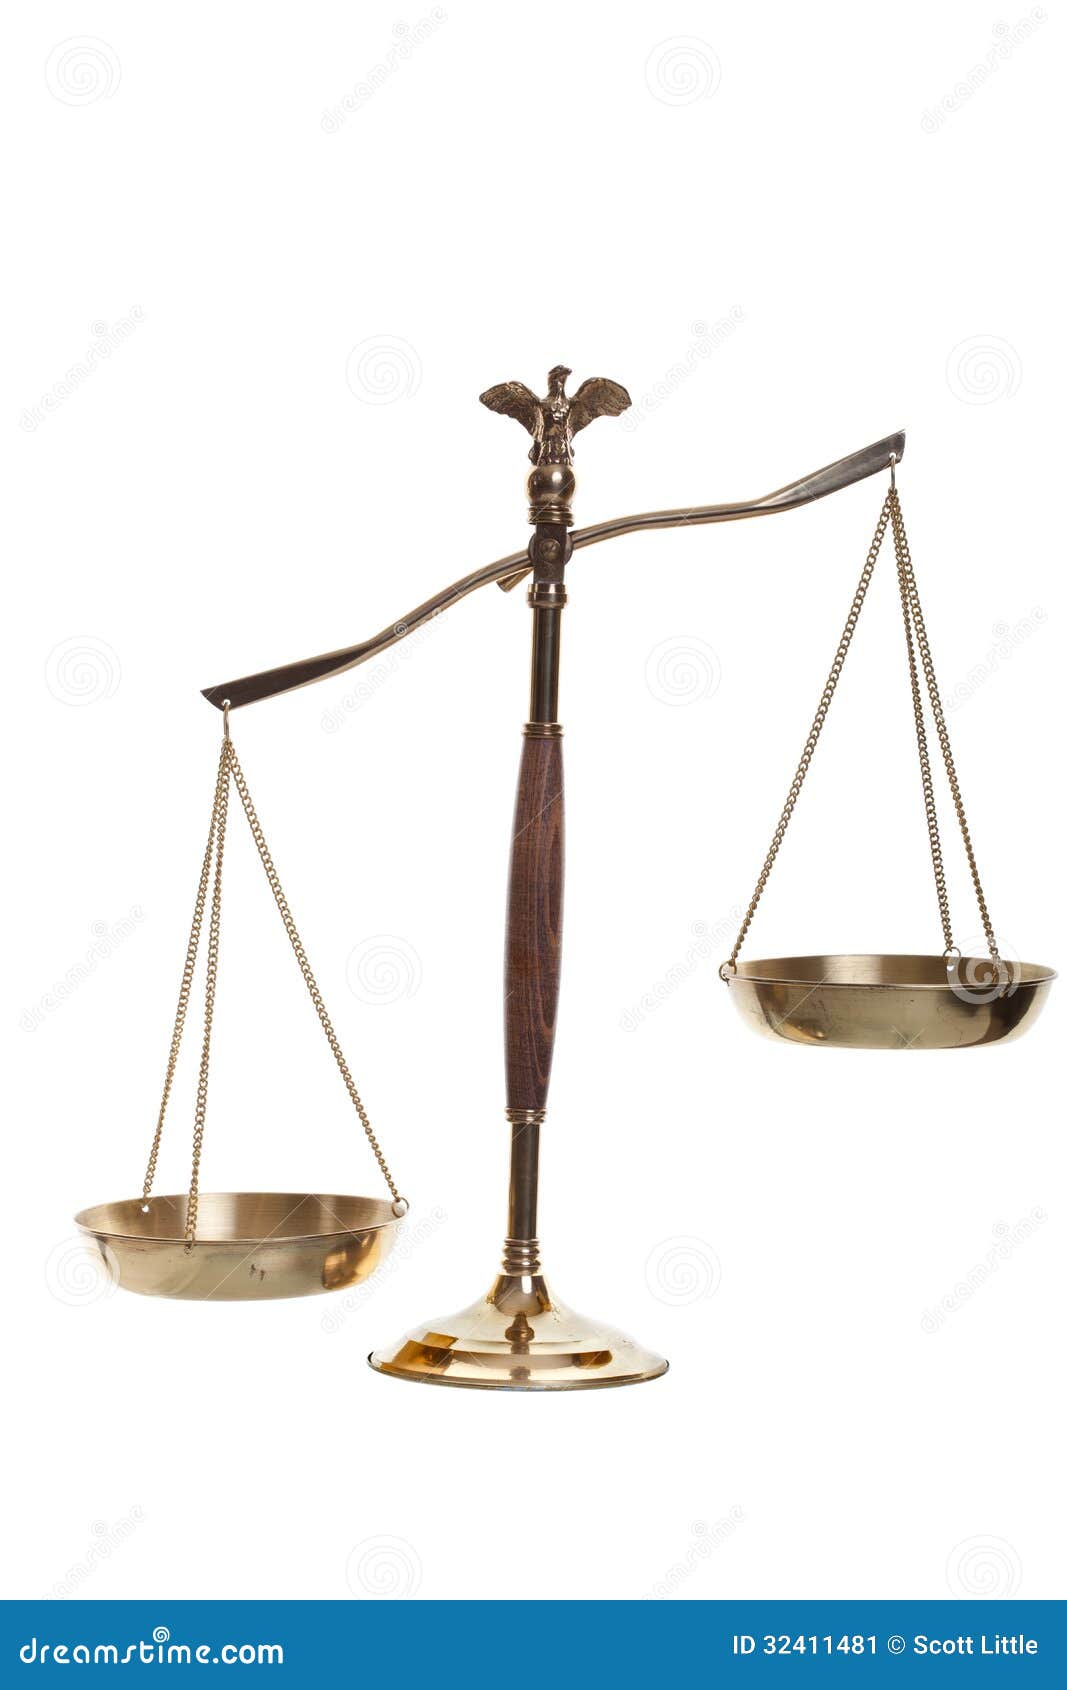 Scales Of Justice Stock Image - Image: 32411481